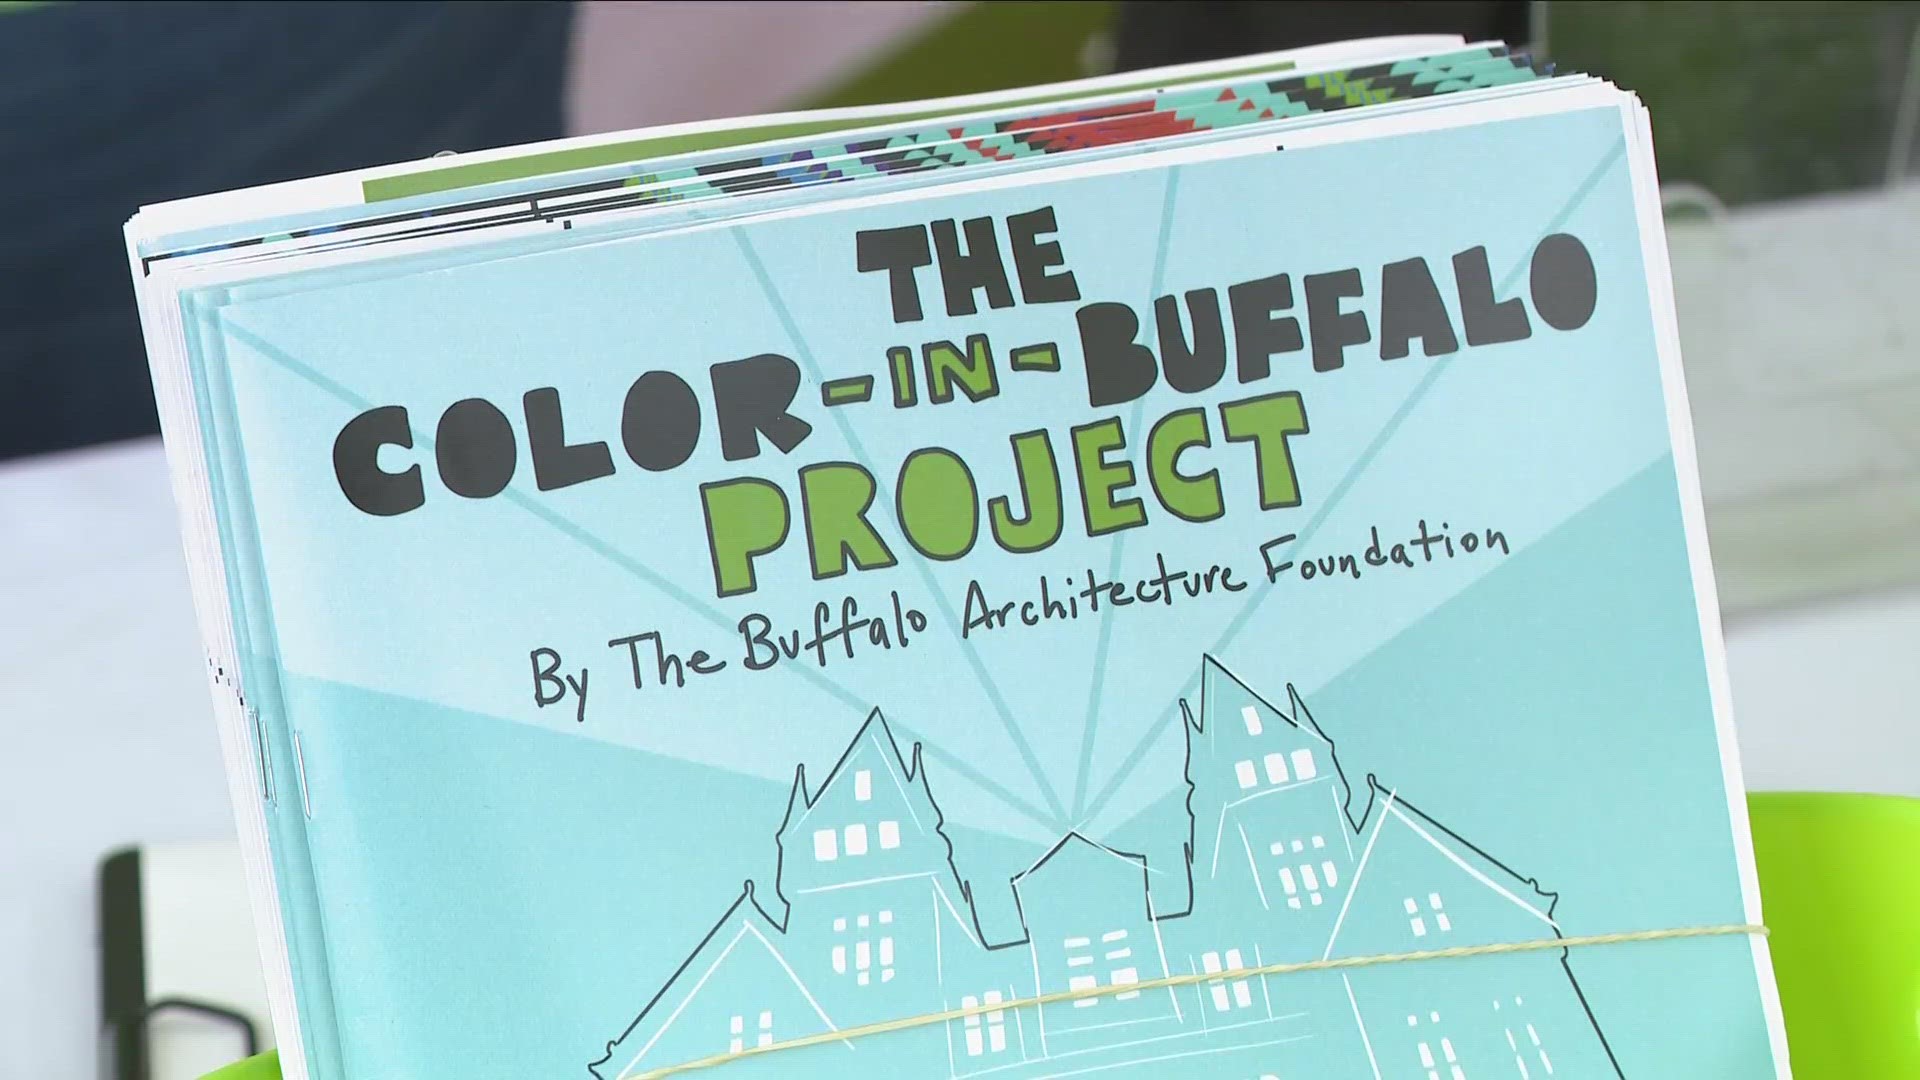 The Buffalo Architecture Foundation released a new coloring book titled Color in Buffalo